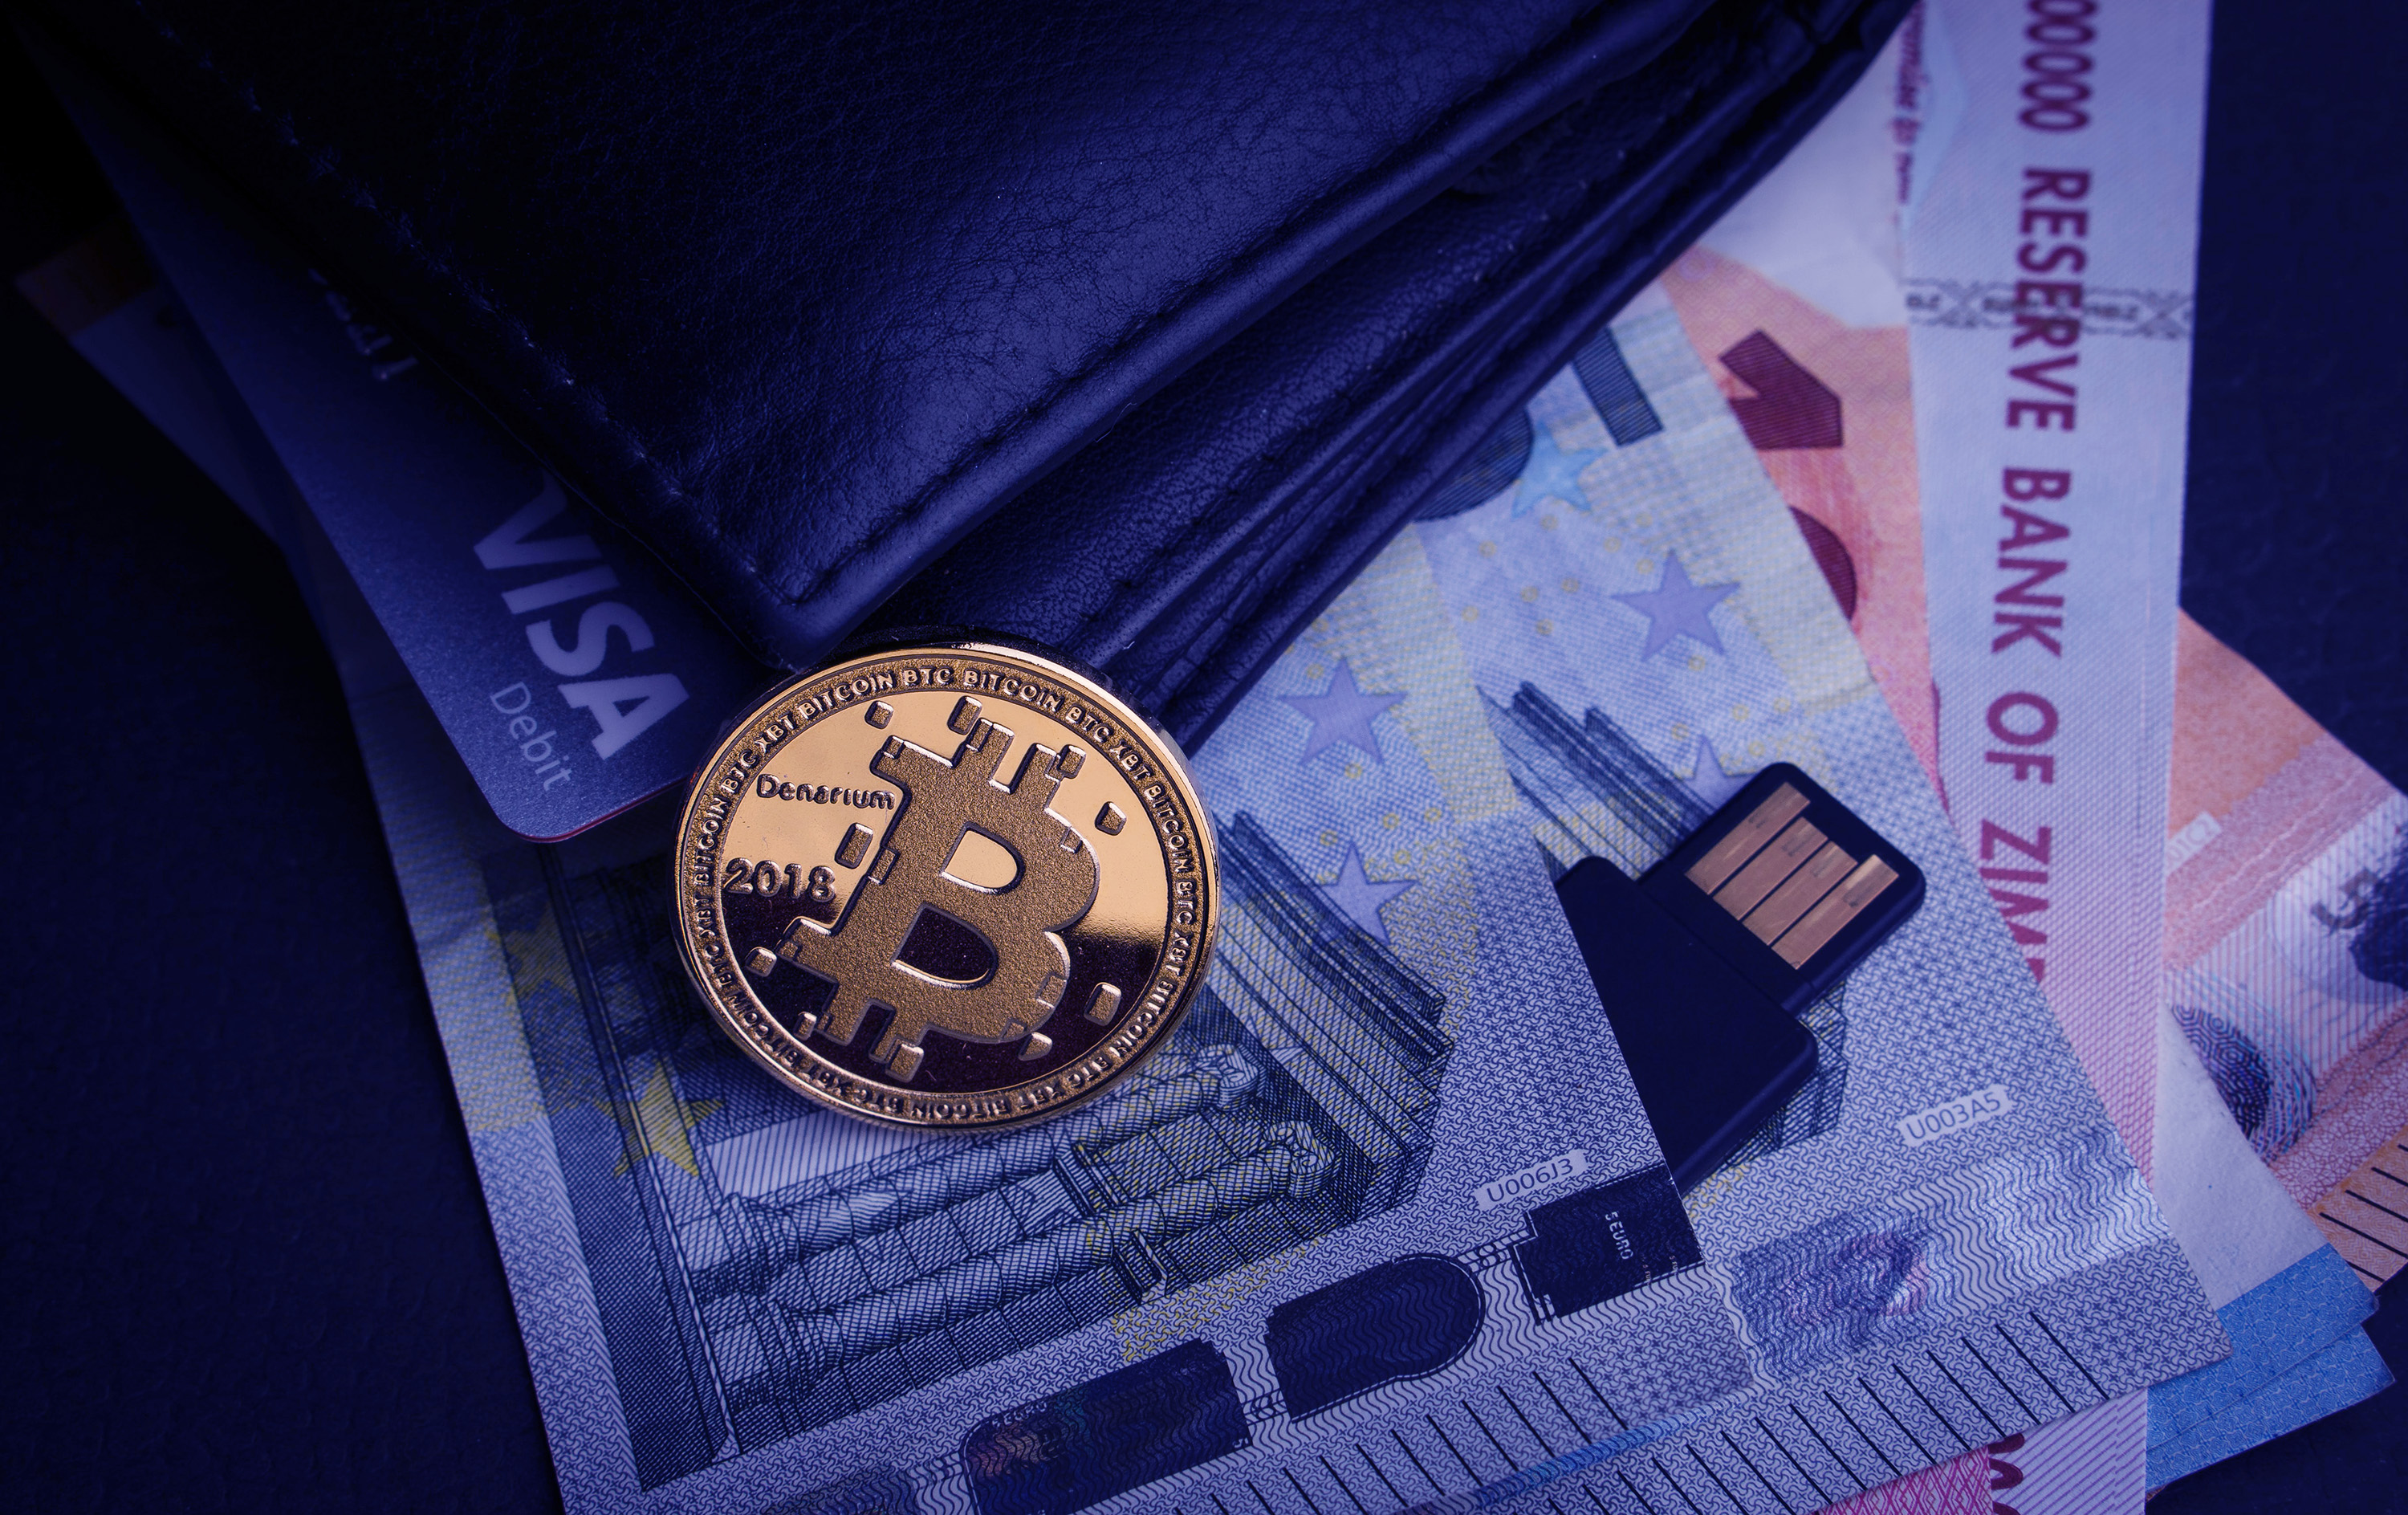 A physical representation of a bitcoin rests on a wallet that also contains a Visa card and paper banknotes from several countries.